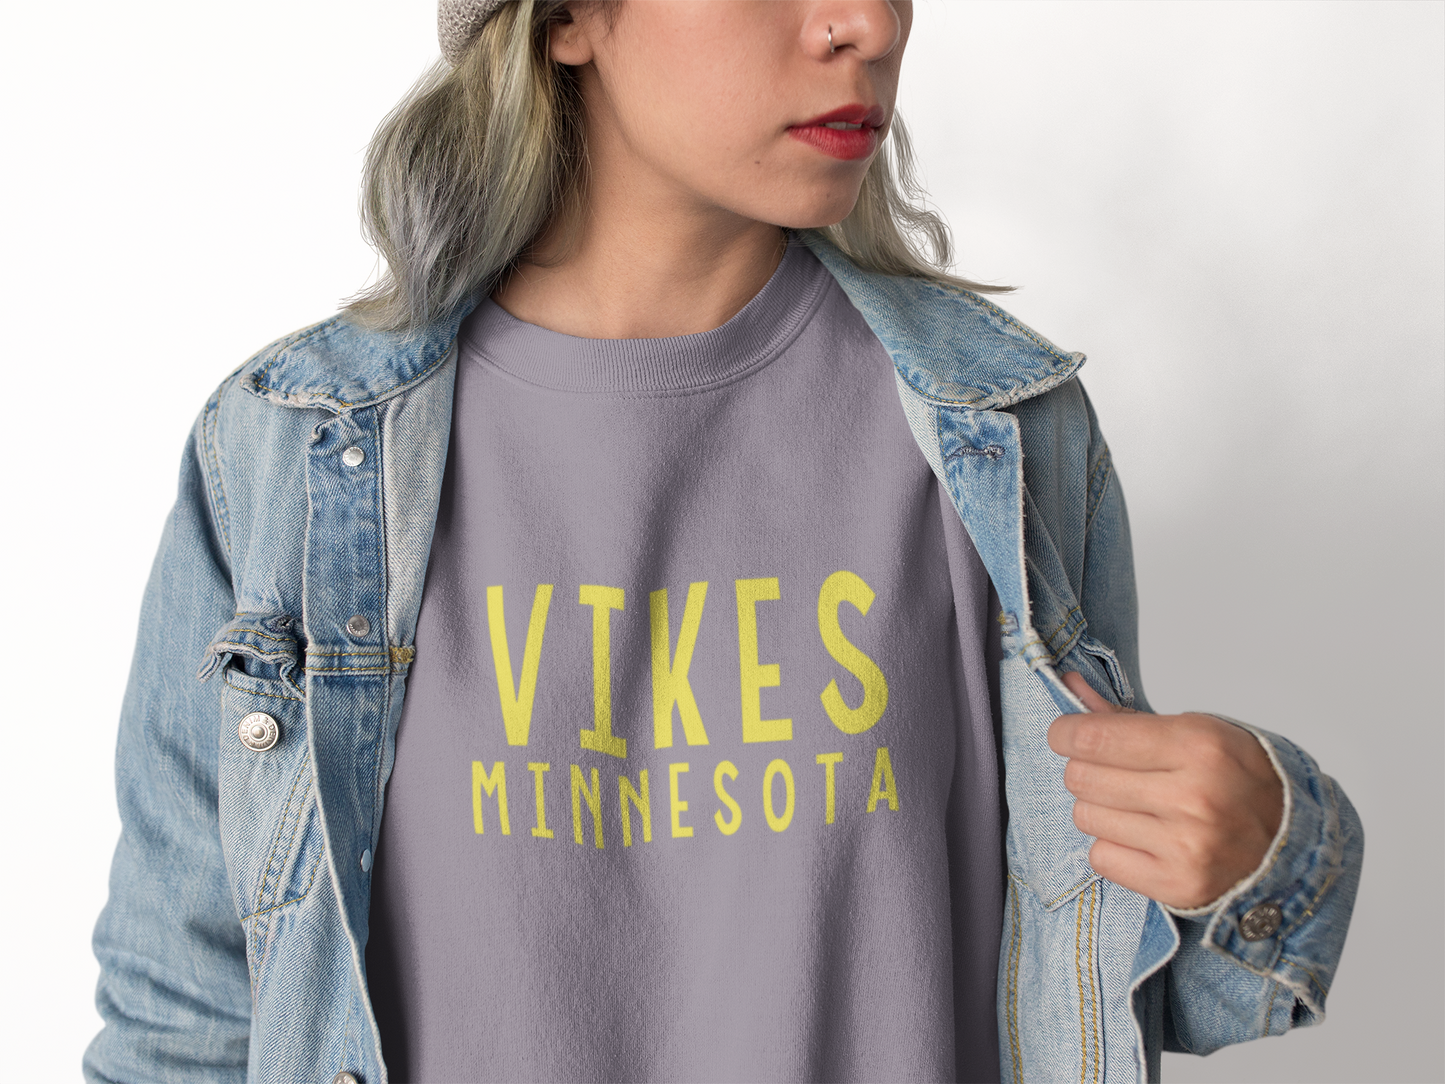 Minnesota Vikings Crewneck Sweatshirt on a model with a jean jacket over the top on a model